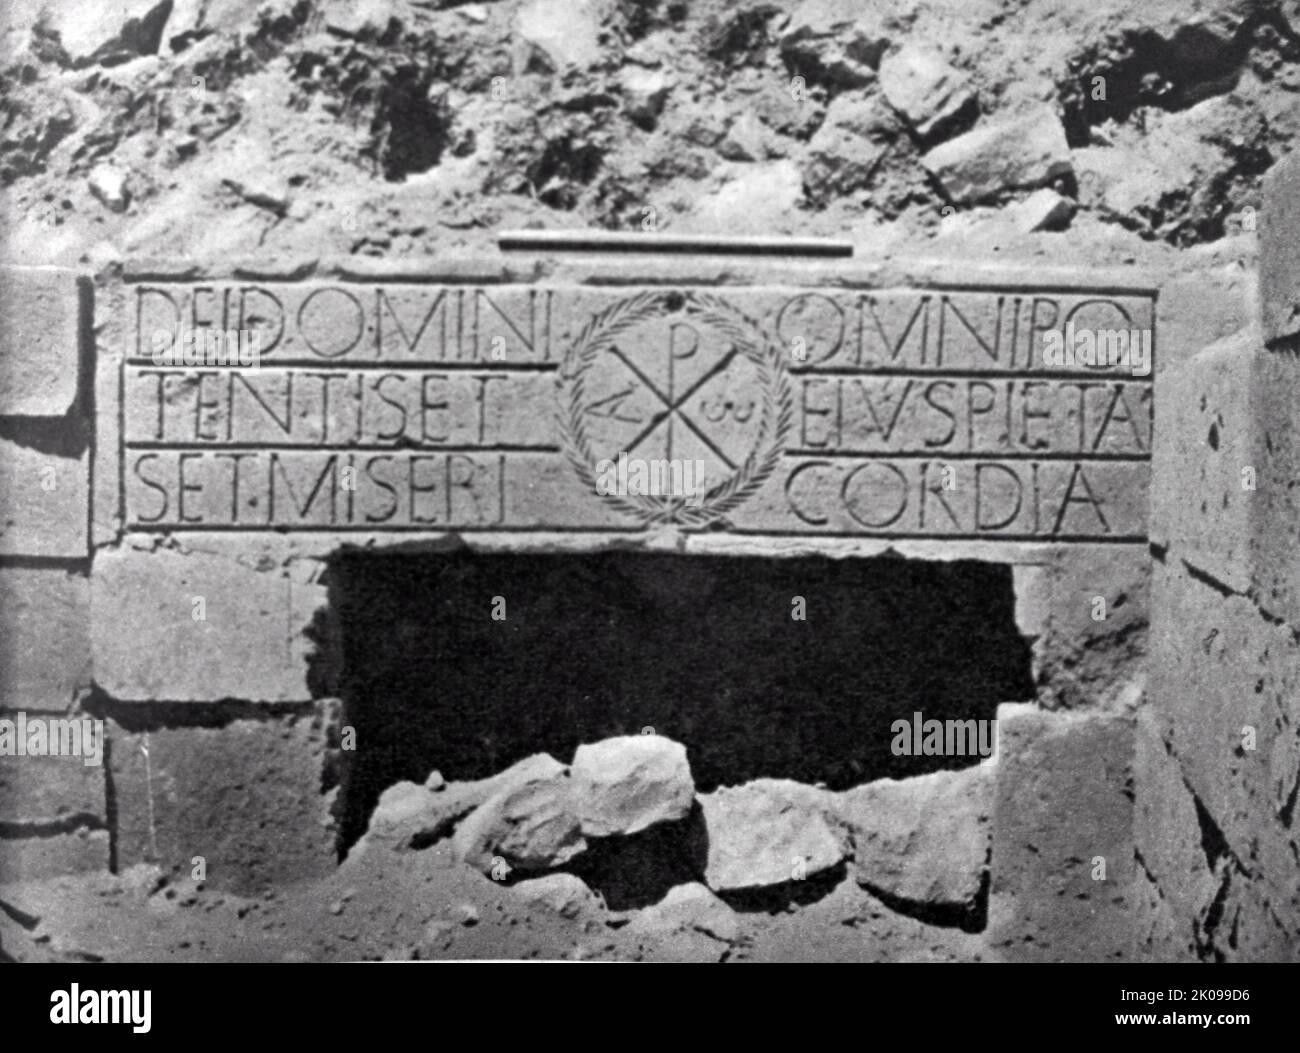 Lintel recording the piety and mercy of God in Tripolitania. Tripolitania is a historic region and former province of Libya. Stock Photo